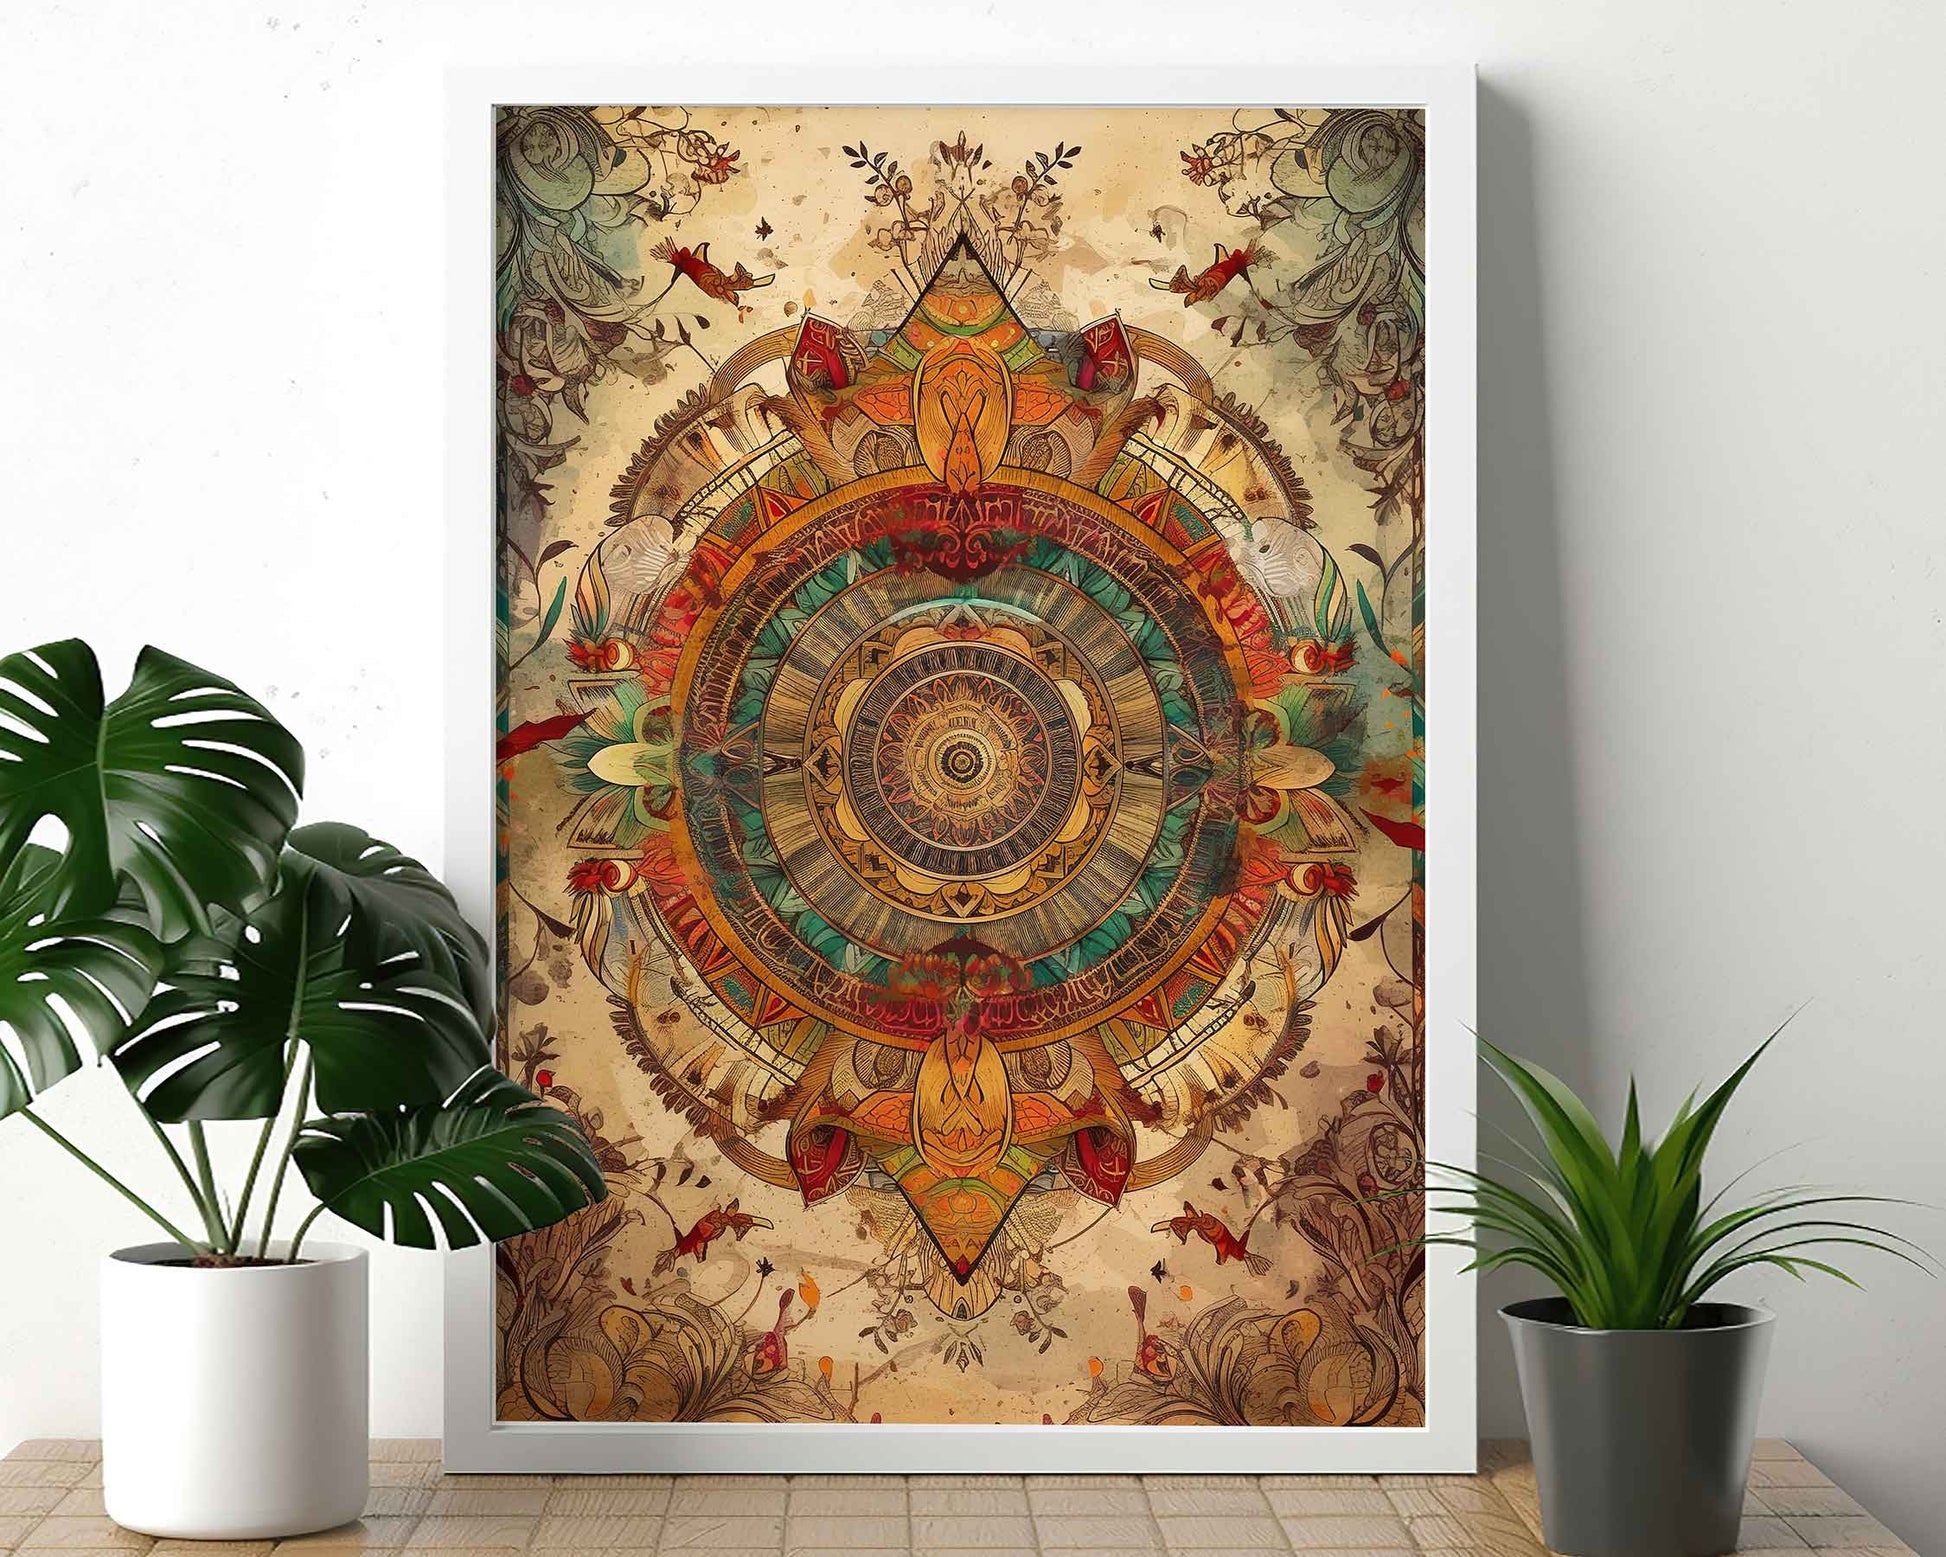 Framed Image of Earth Tone Boho Mandalas Flowers and Feathers Wall Art Poster Prints